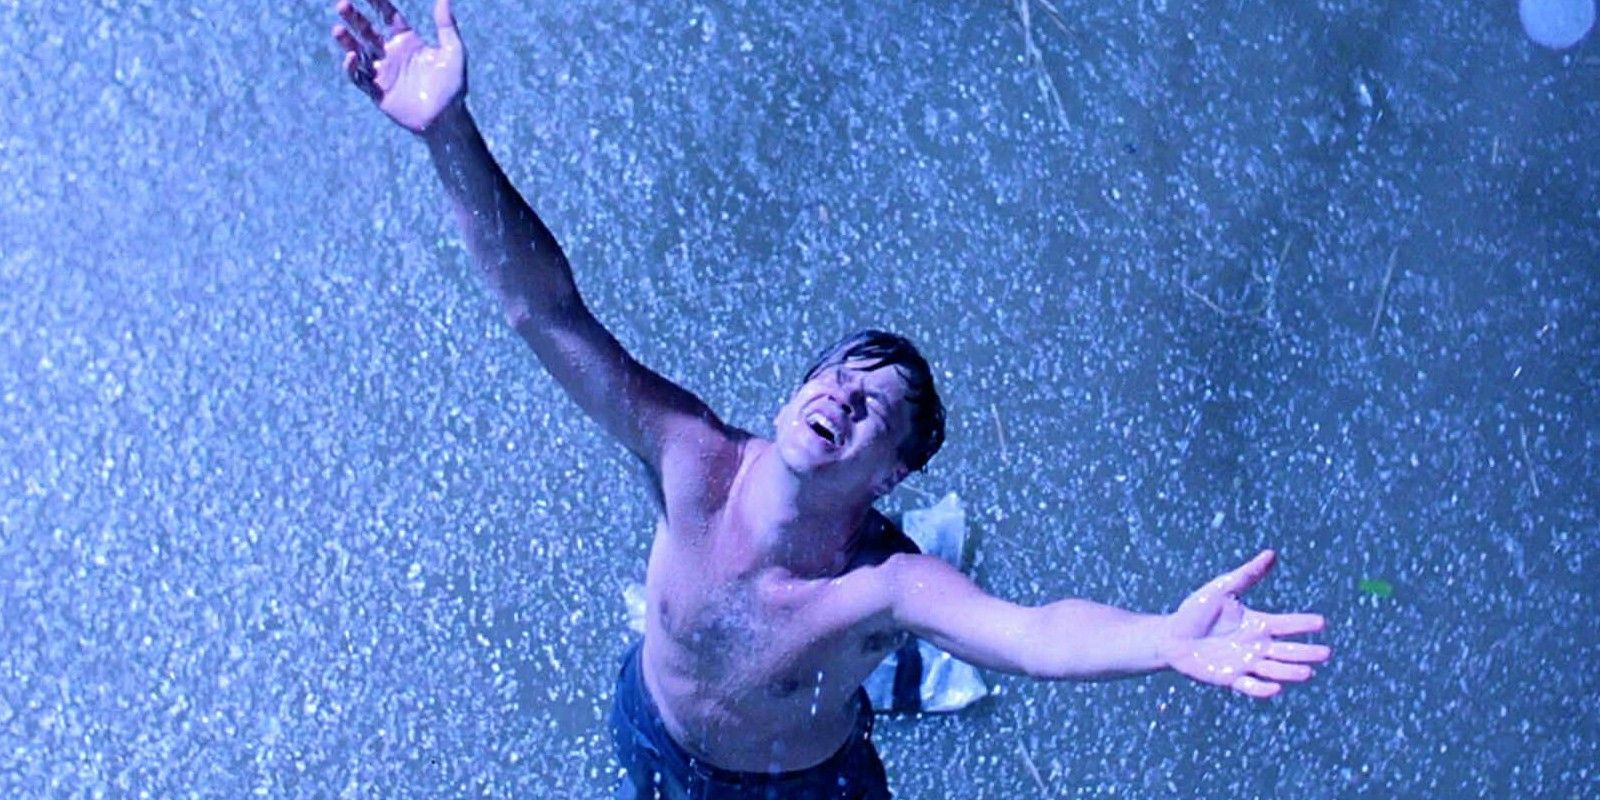 Andy opens his arms to the rain in The Shawshank Redemption